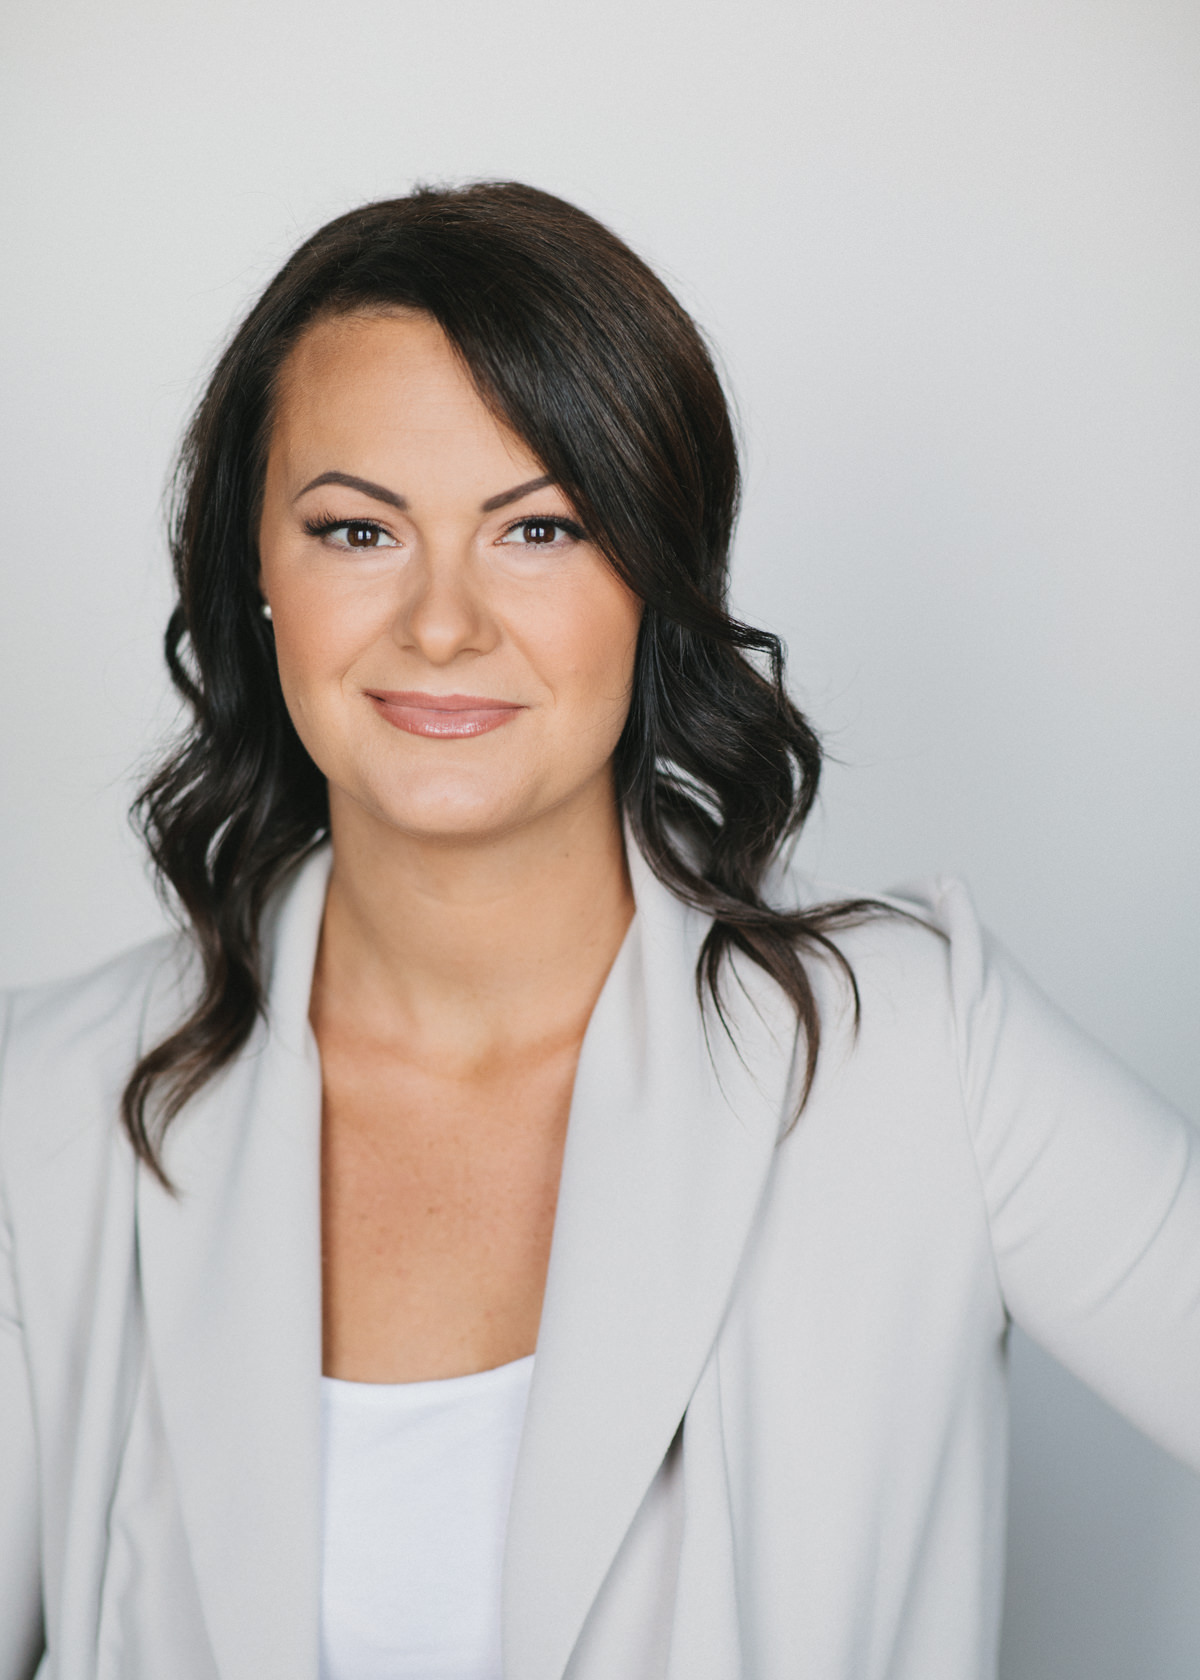 A professional headshot of a self employed woman wearing an off white blazer and white top.